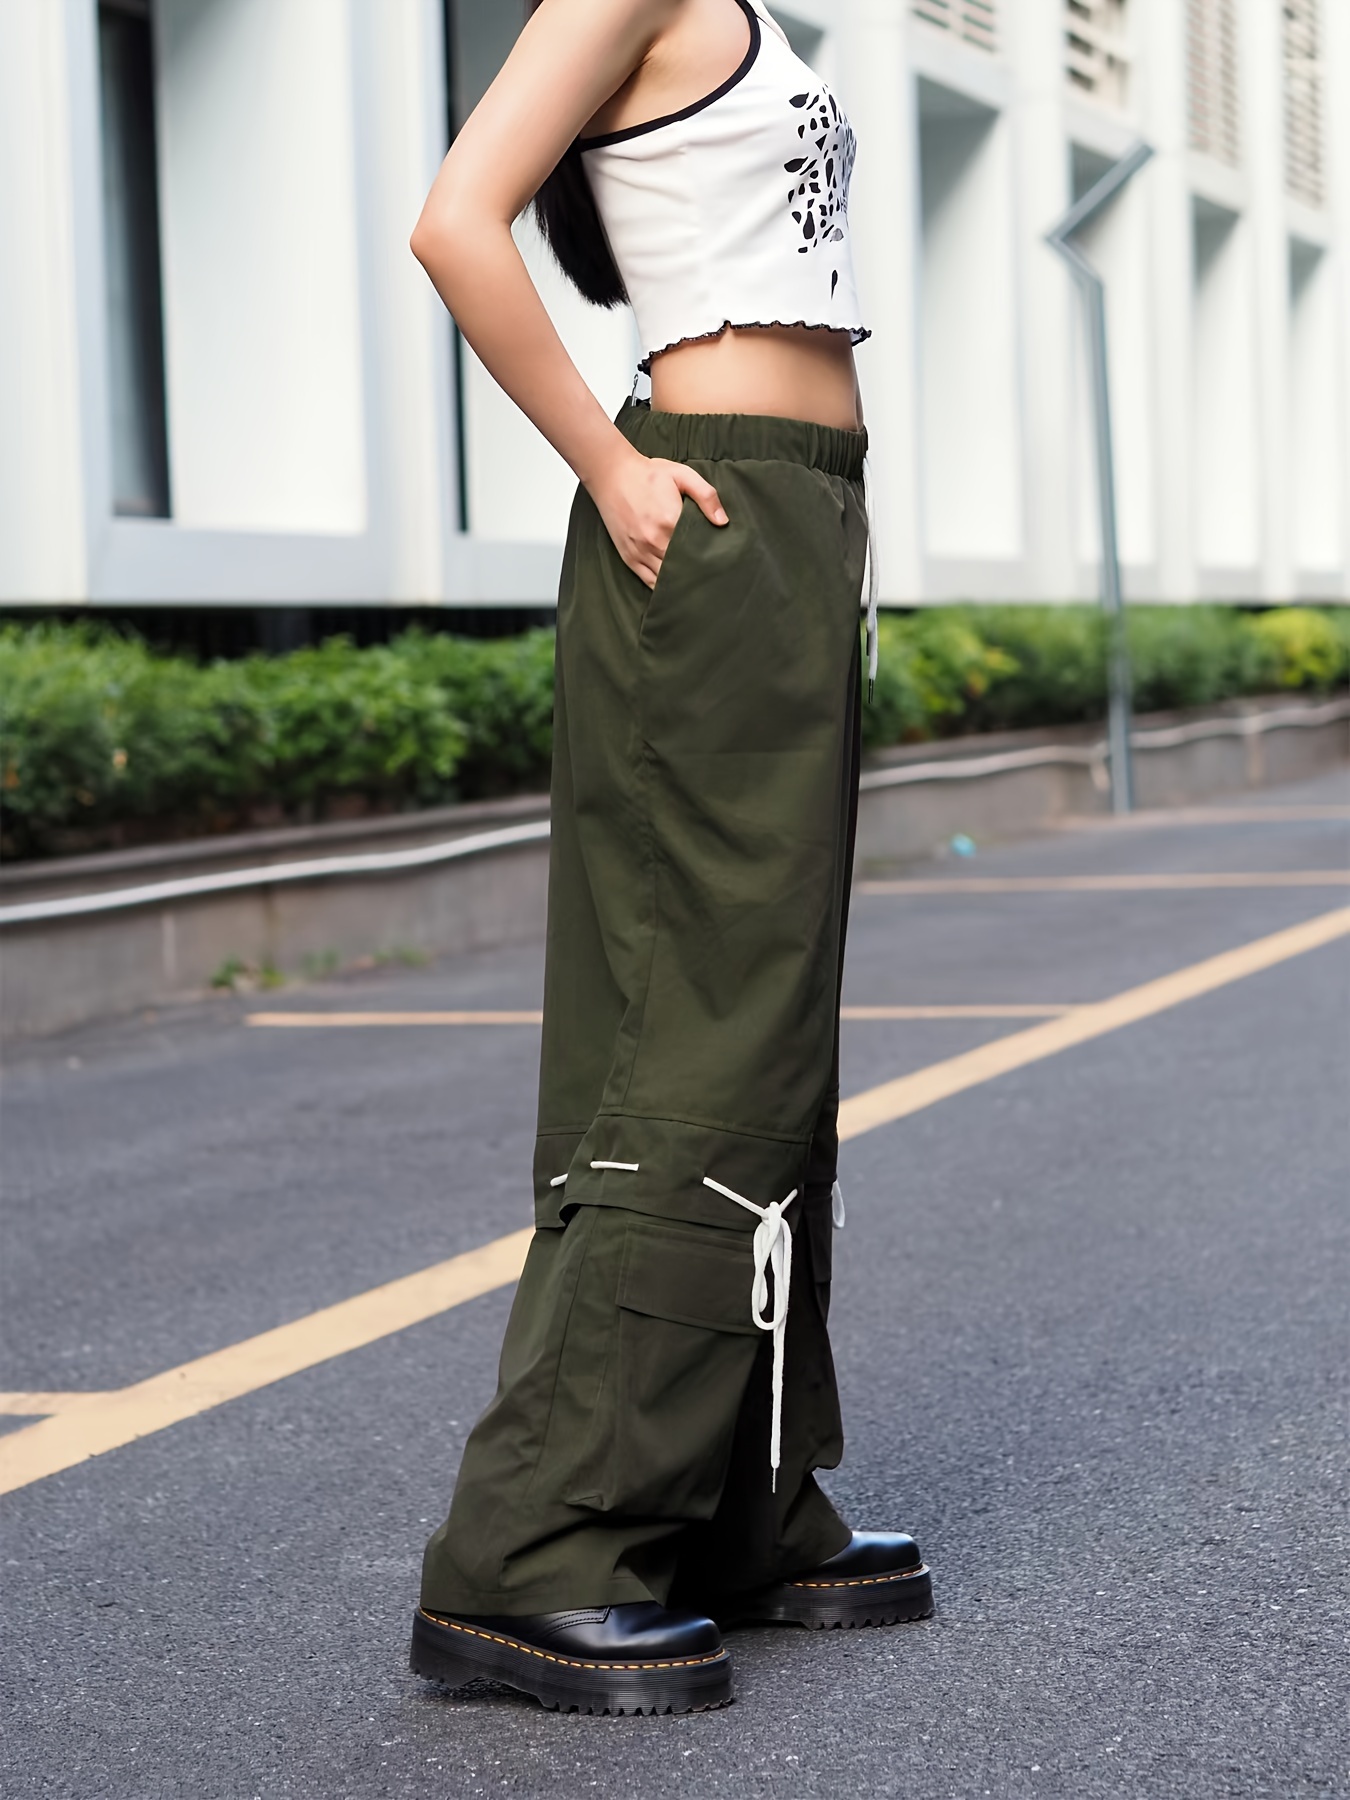 Plus Size Pants for Women Pants with Pockets 1170# Women Cargo Pants Solid  Strap Loose Multi-s Casual Pants Fashion Women Drawstring Elastic Waist